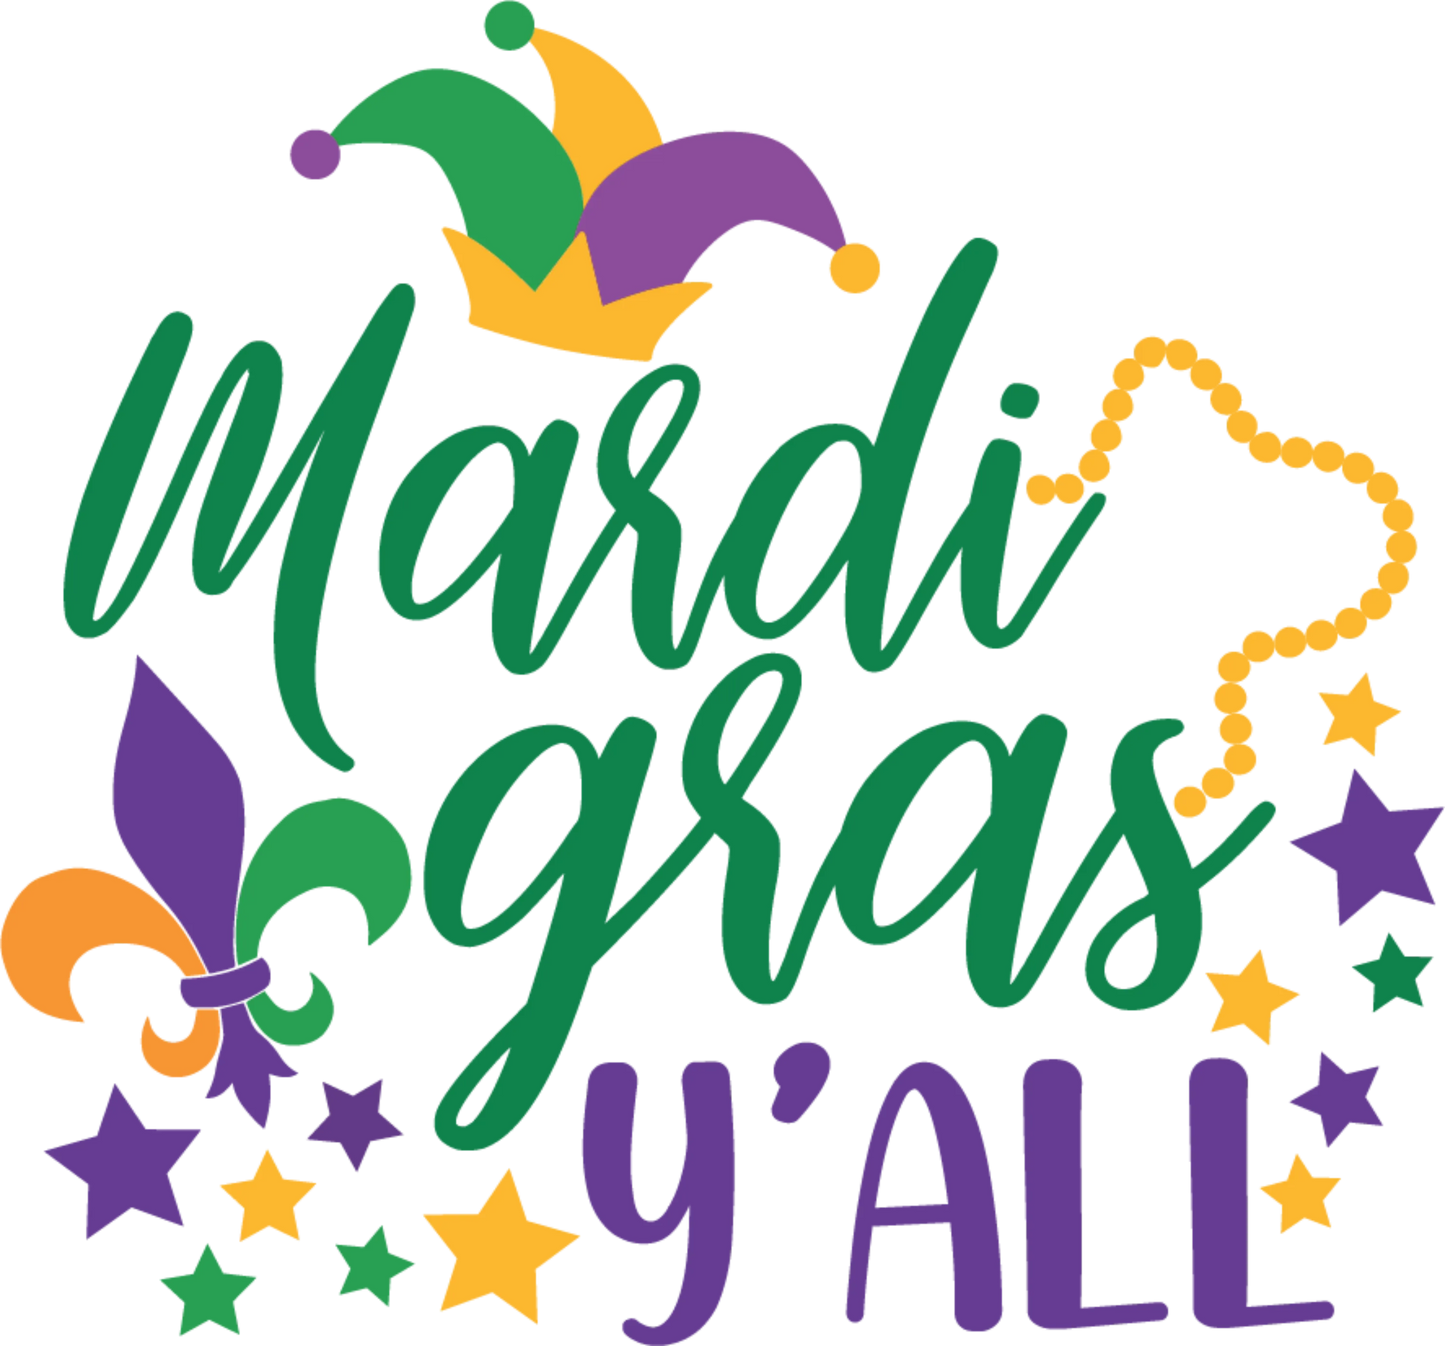 MG 6 - "Mardi Gras Y'all" DTF Transfer, DTF Transfer, Apparel & Accessories, Ace DTF